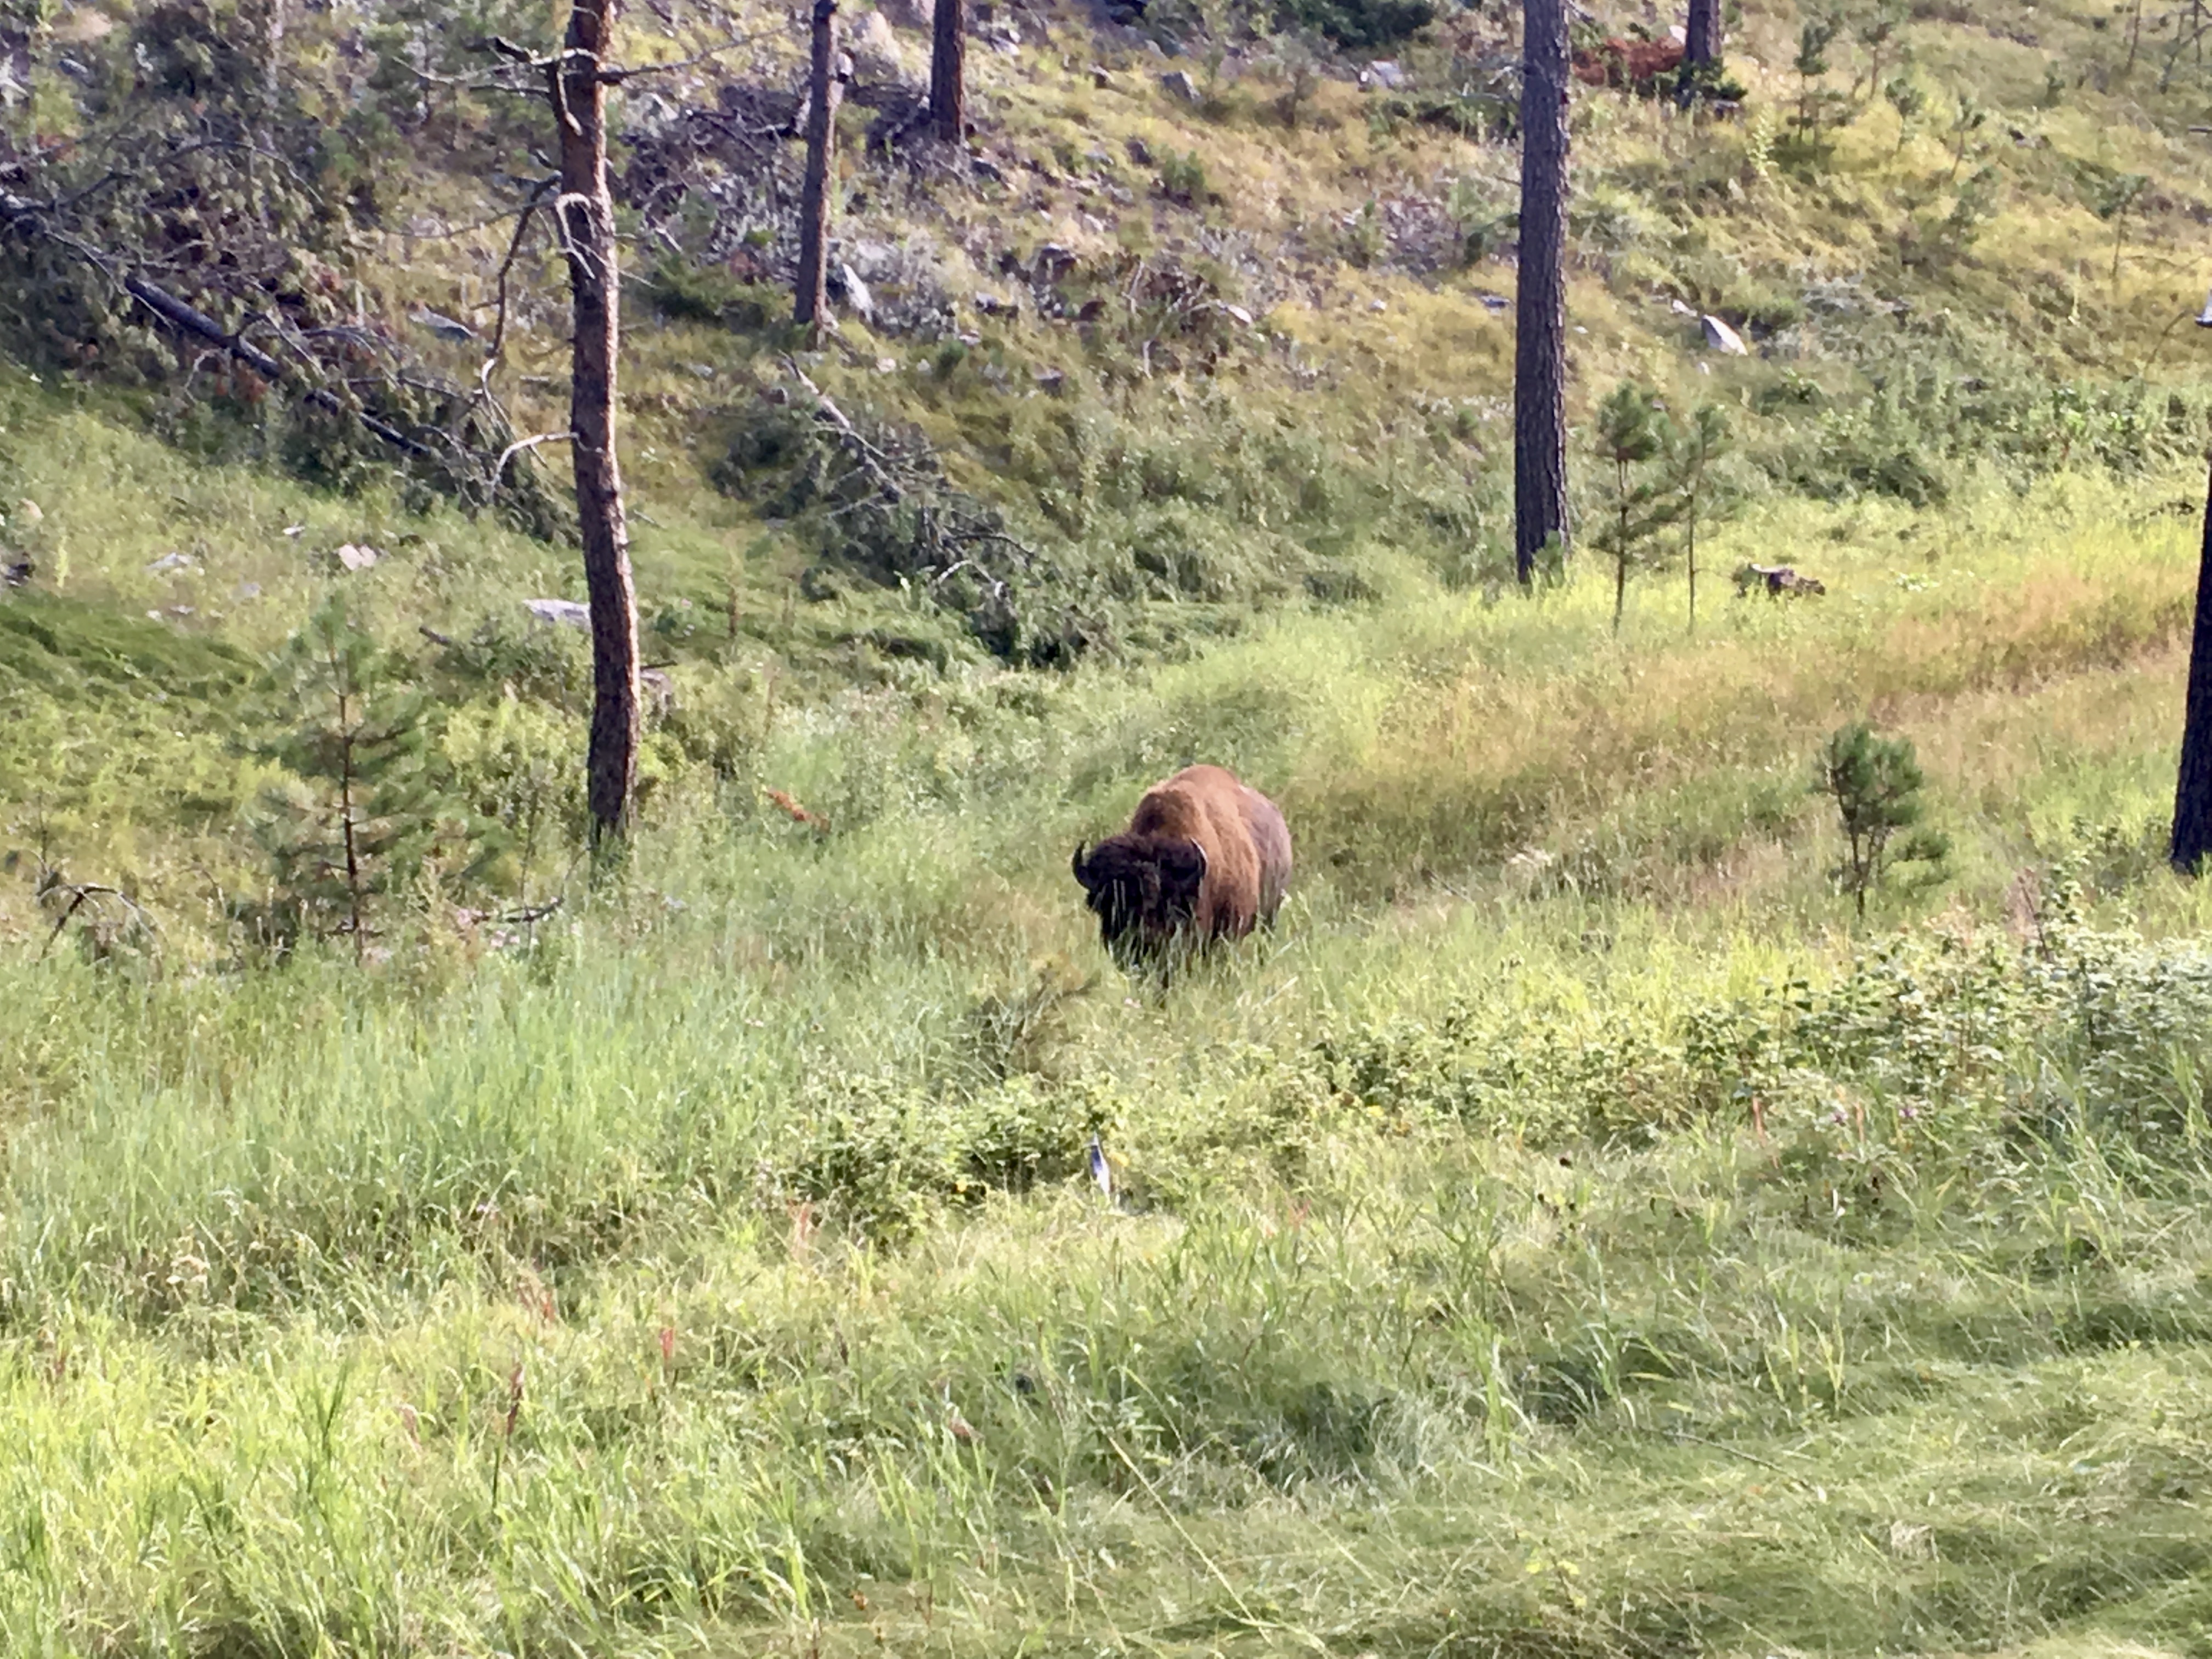 A bull bison who was blocking the trail early one morning in [Custer State Park,](https://gfp.sd.gov/parks/detail/custer-state-park/) South Dakota